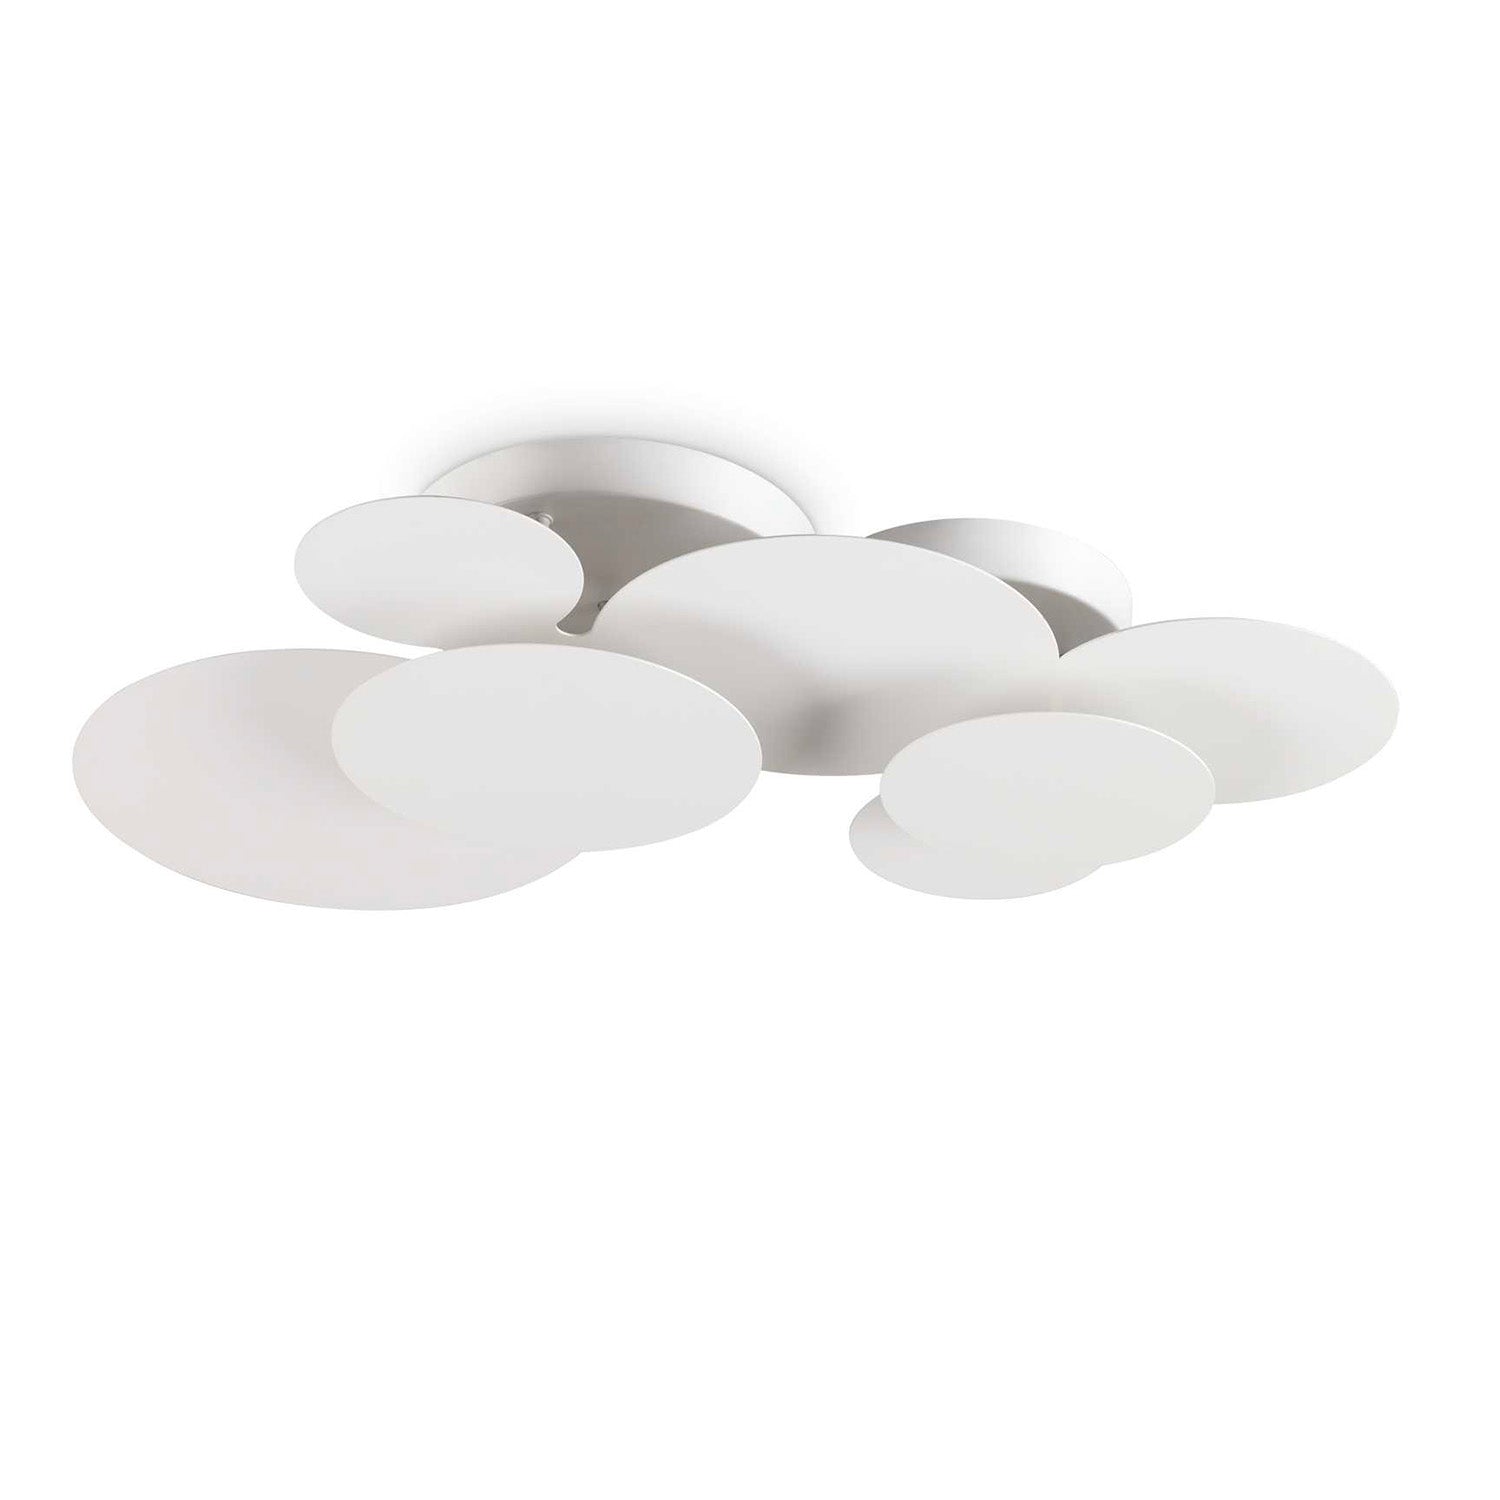 CLOUD - Cloud ceiling light with integrated LED